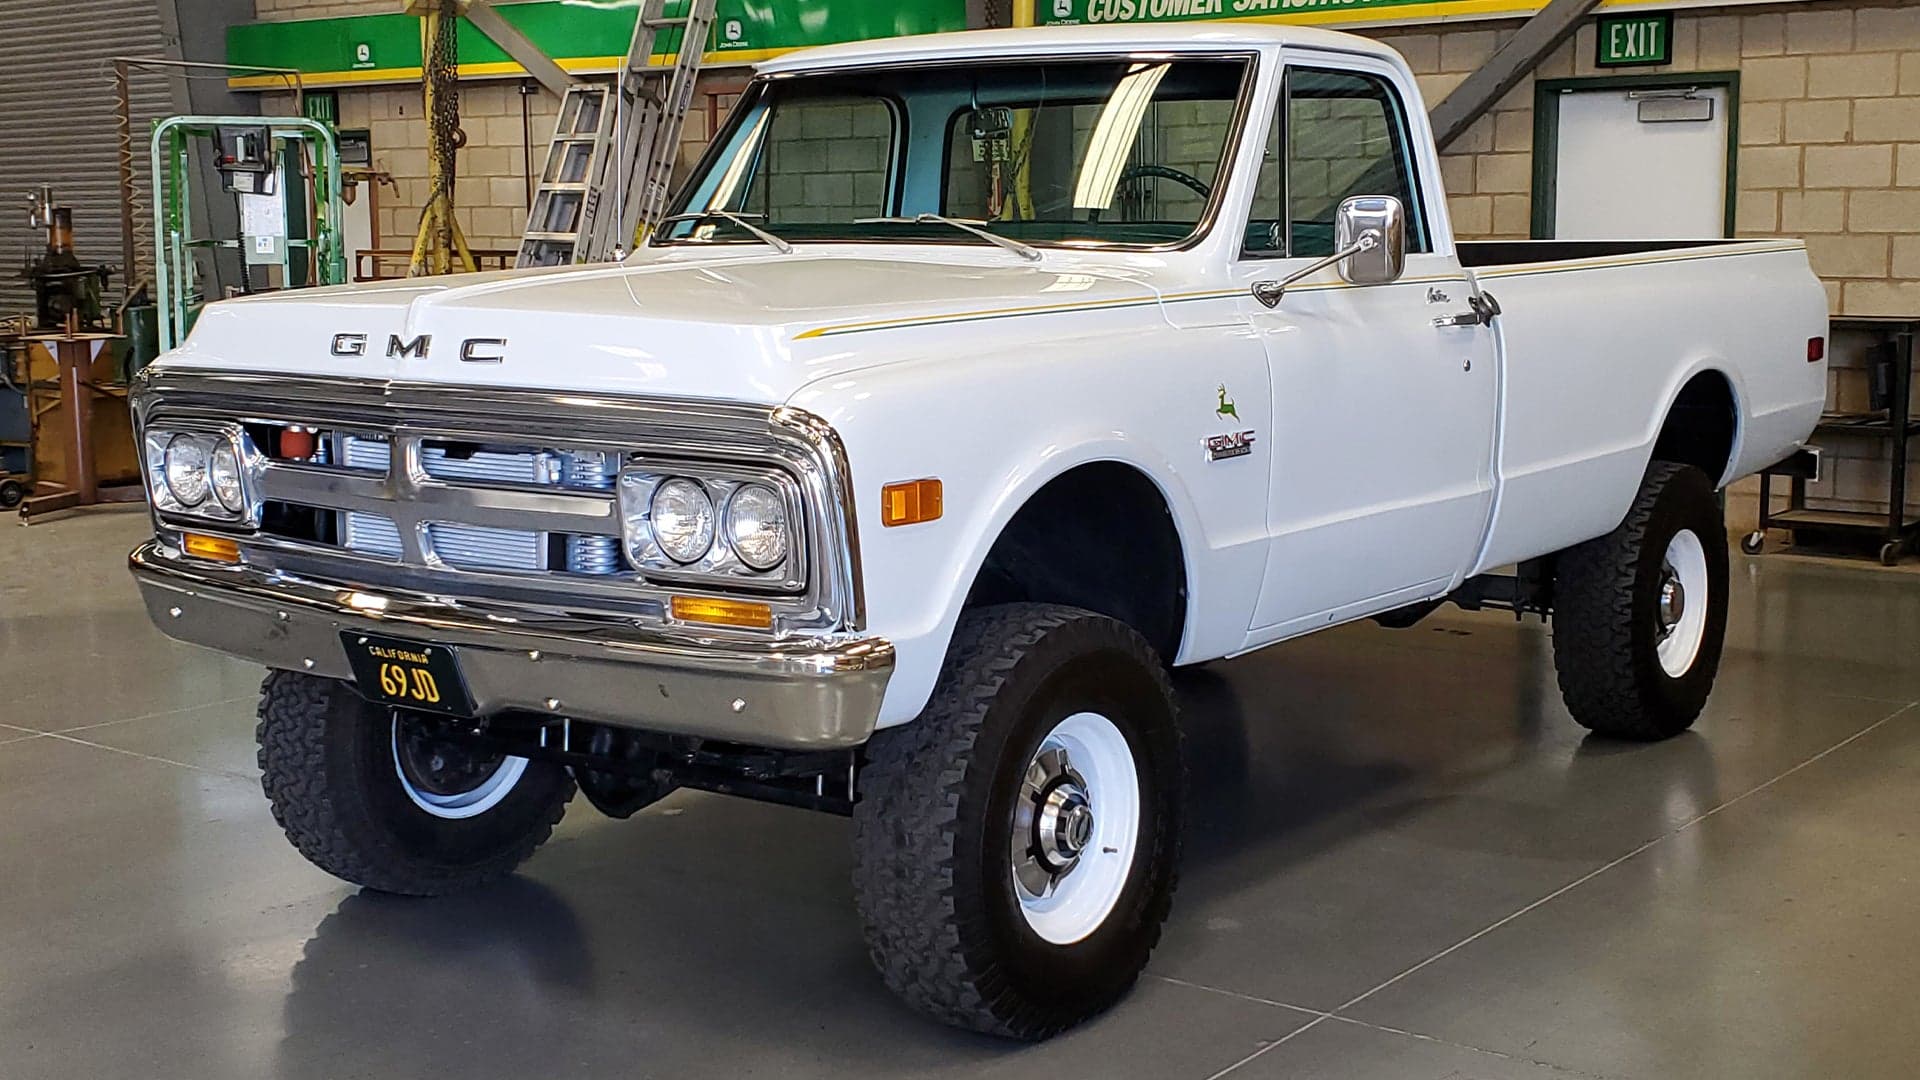 Swapping a John Deere Diesel Tractor Engine Into a 1969 GMC Truck Is Ridiculously Tough